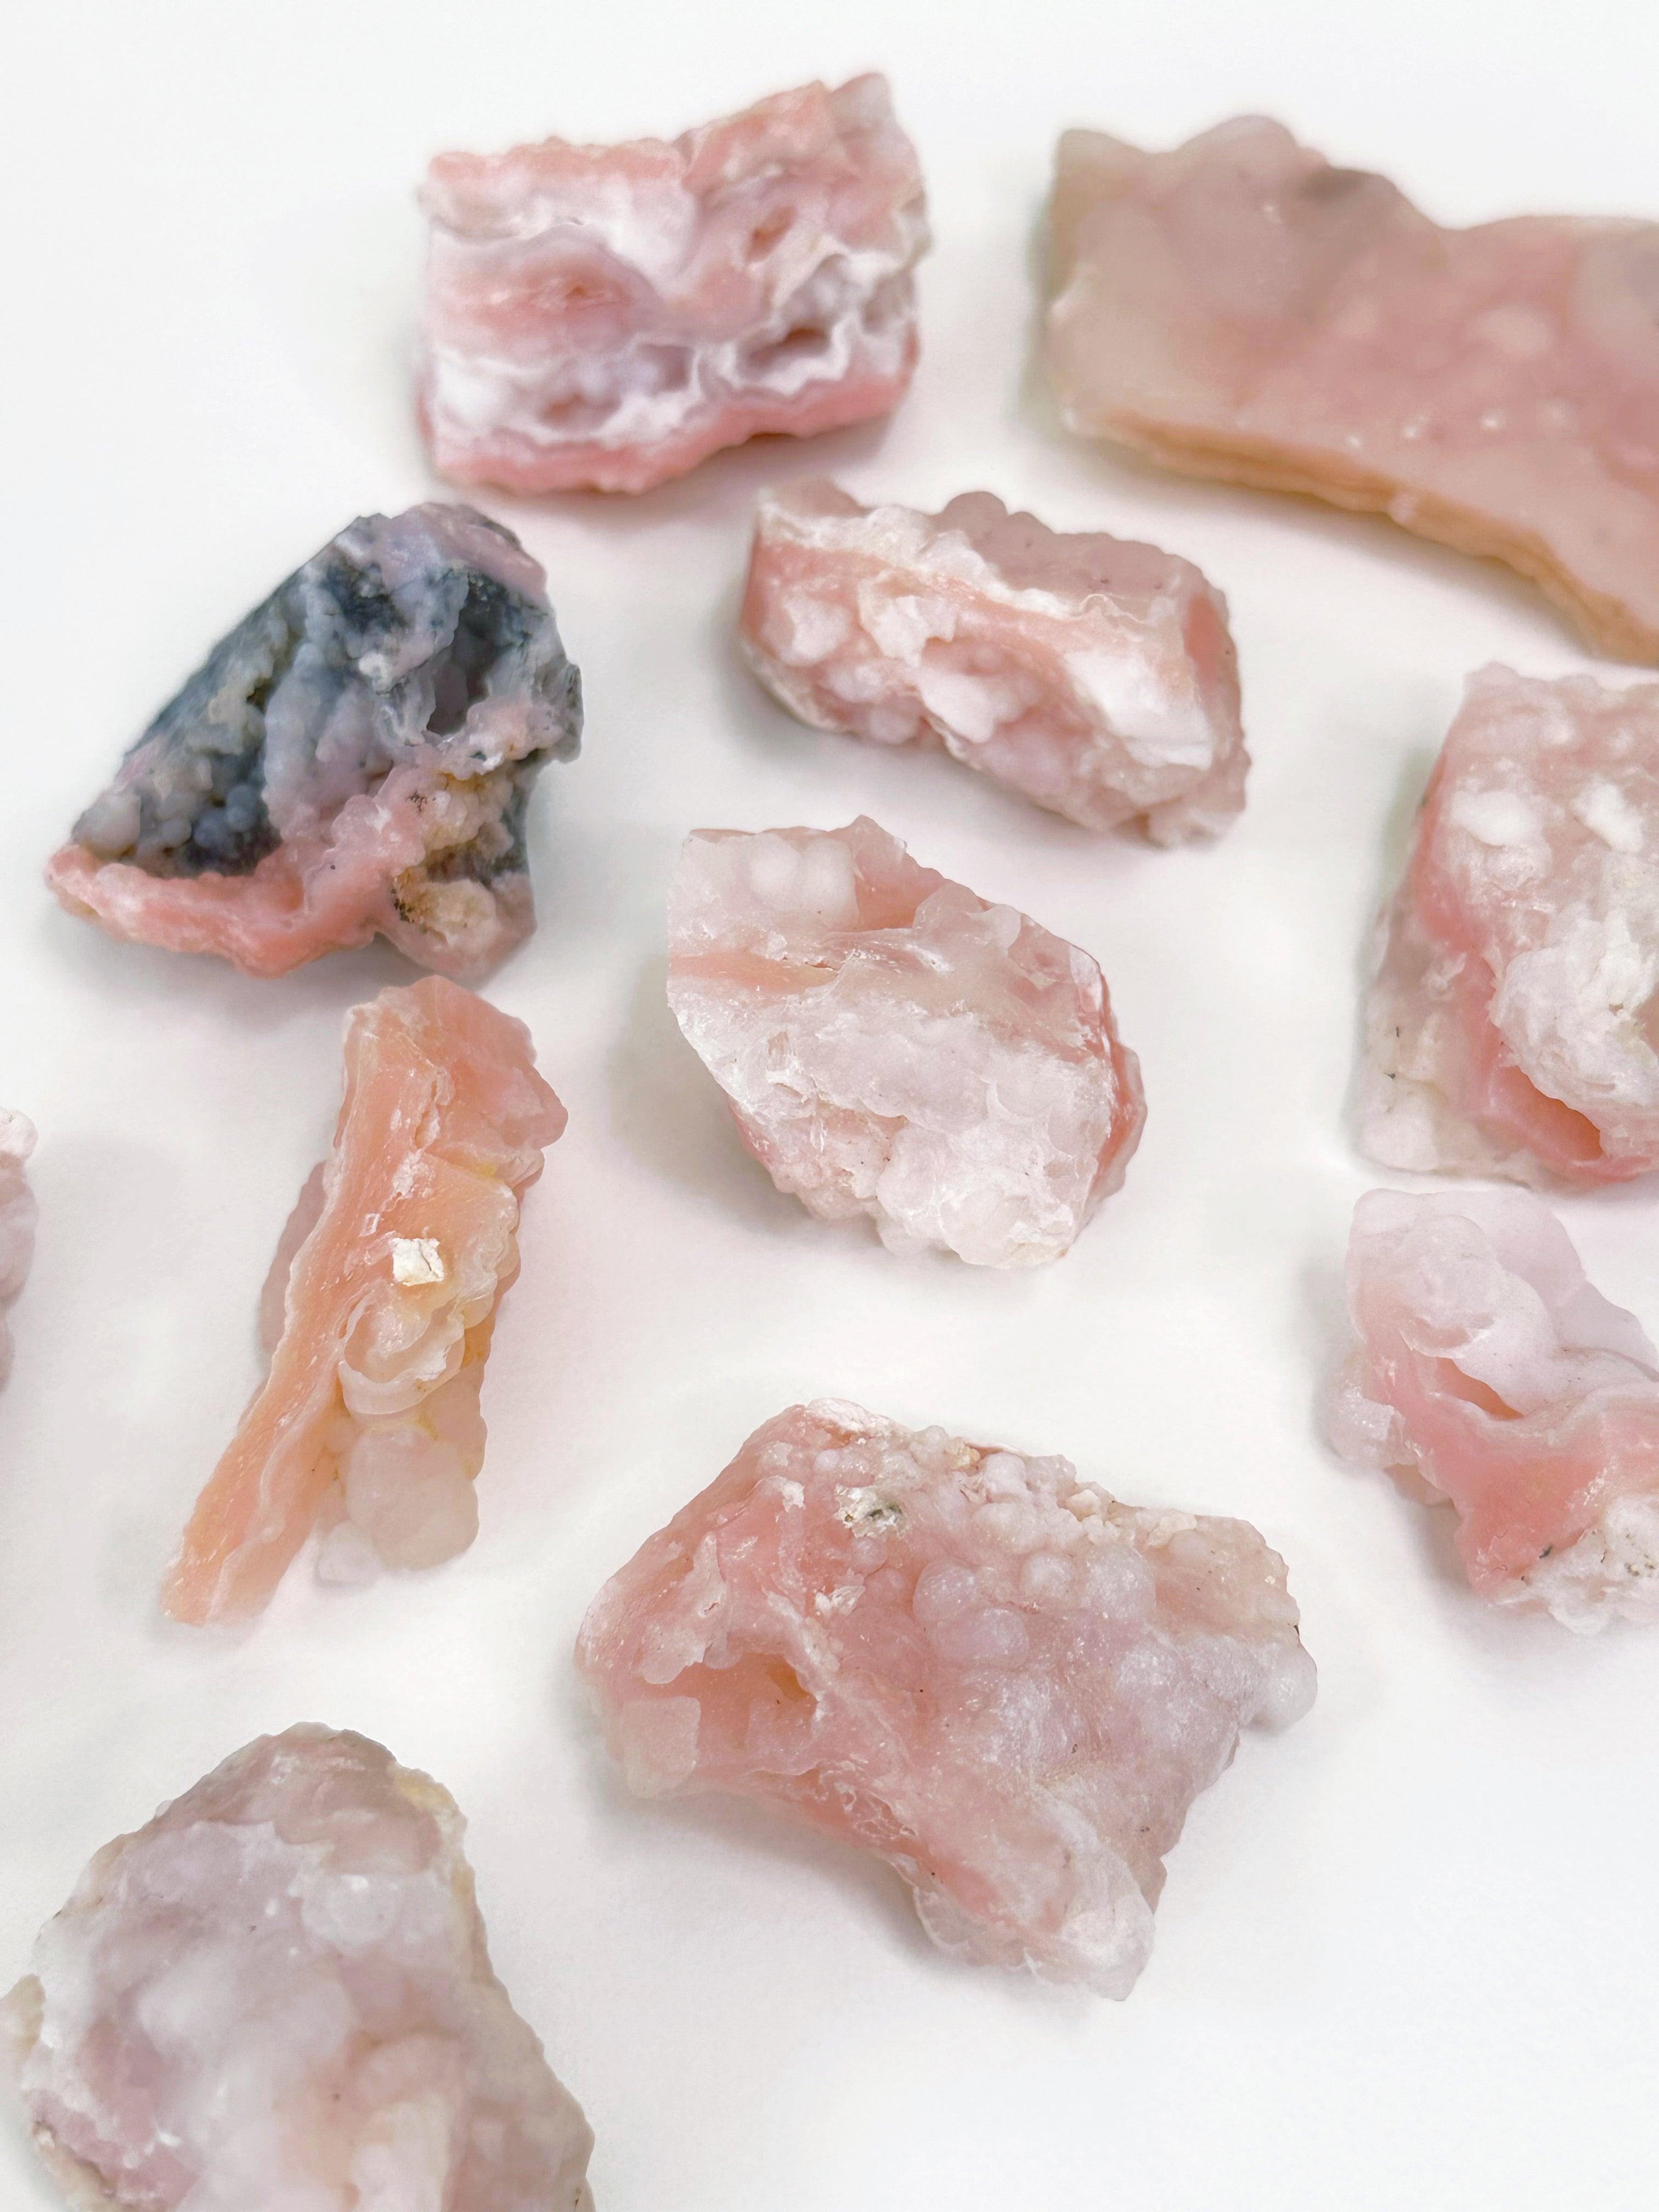 BOTRYOIDAL PINK OPAL - RAW - 33 bday, 444 sale, end of year sale, february, holiday sale, opal, pink opal, pocket crystal, raw crystal, raw stone, recently added, rough crystal, Rough Stone, valentine's day - The Mineral Maven